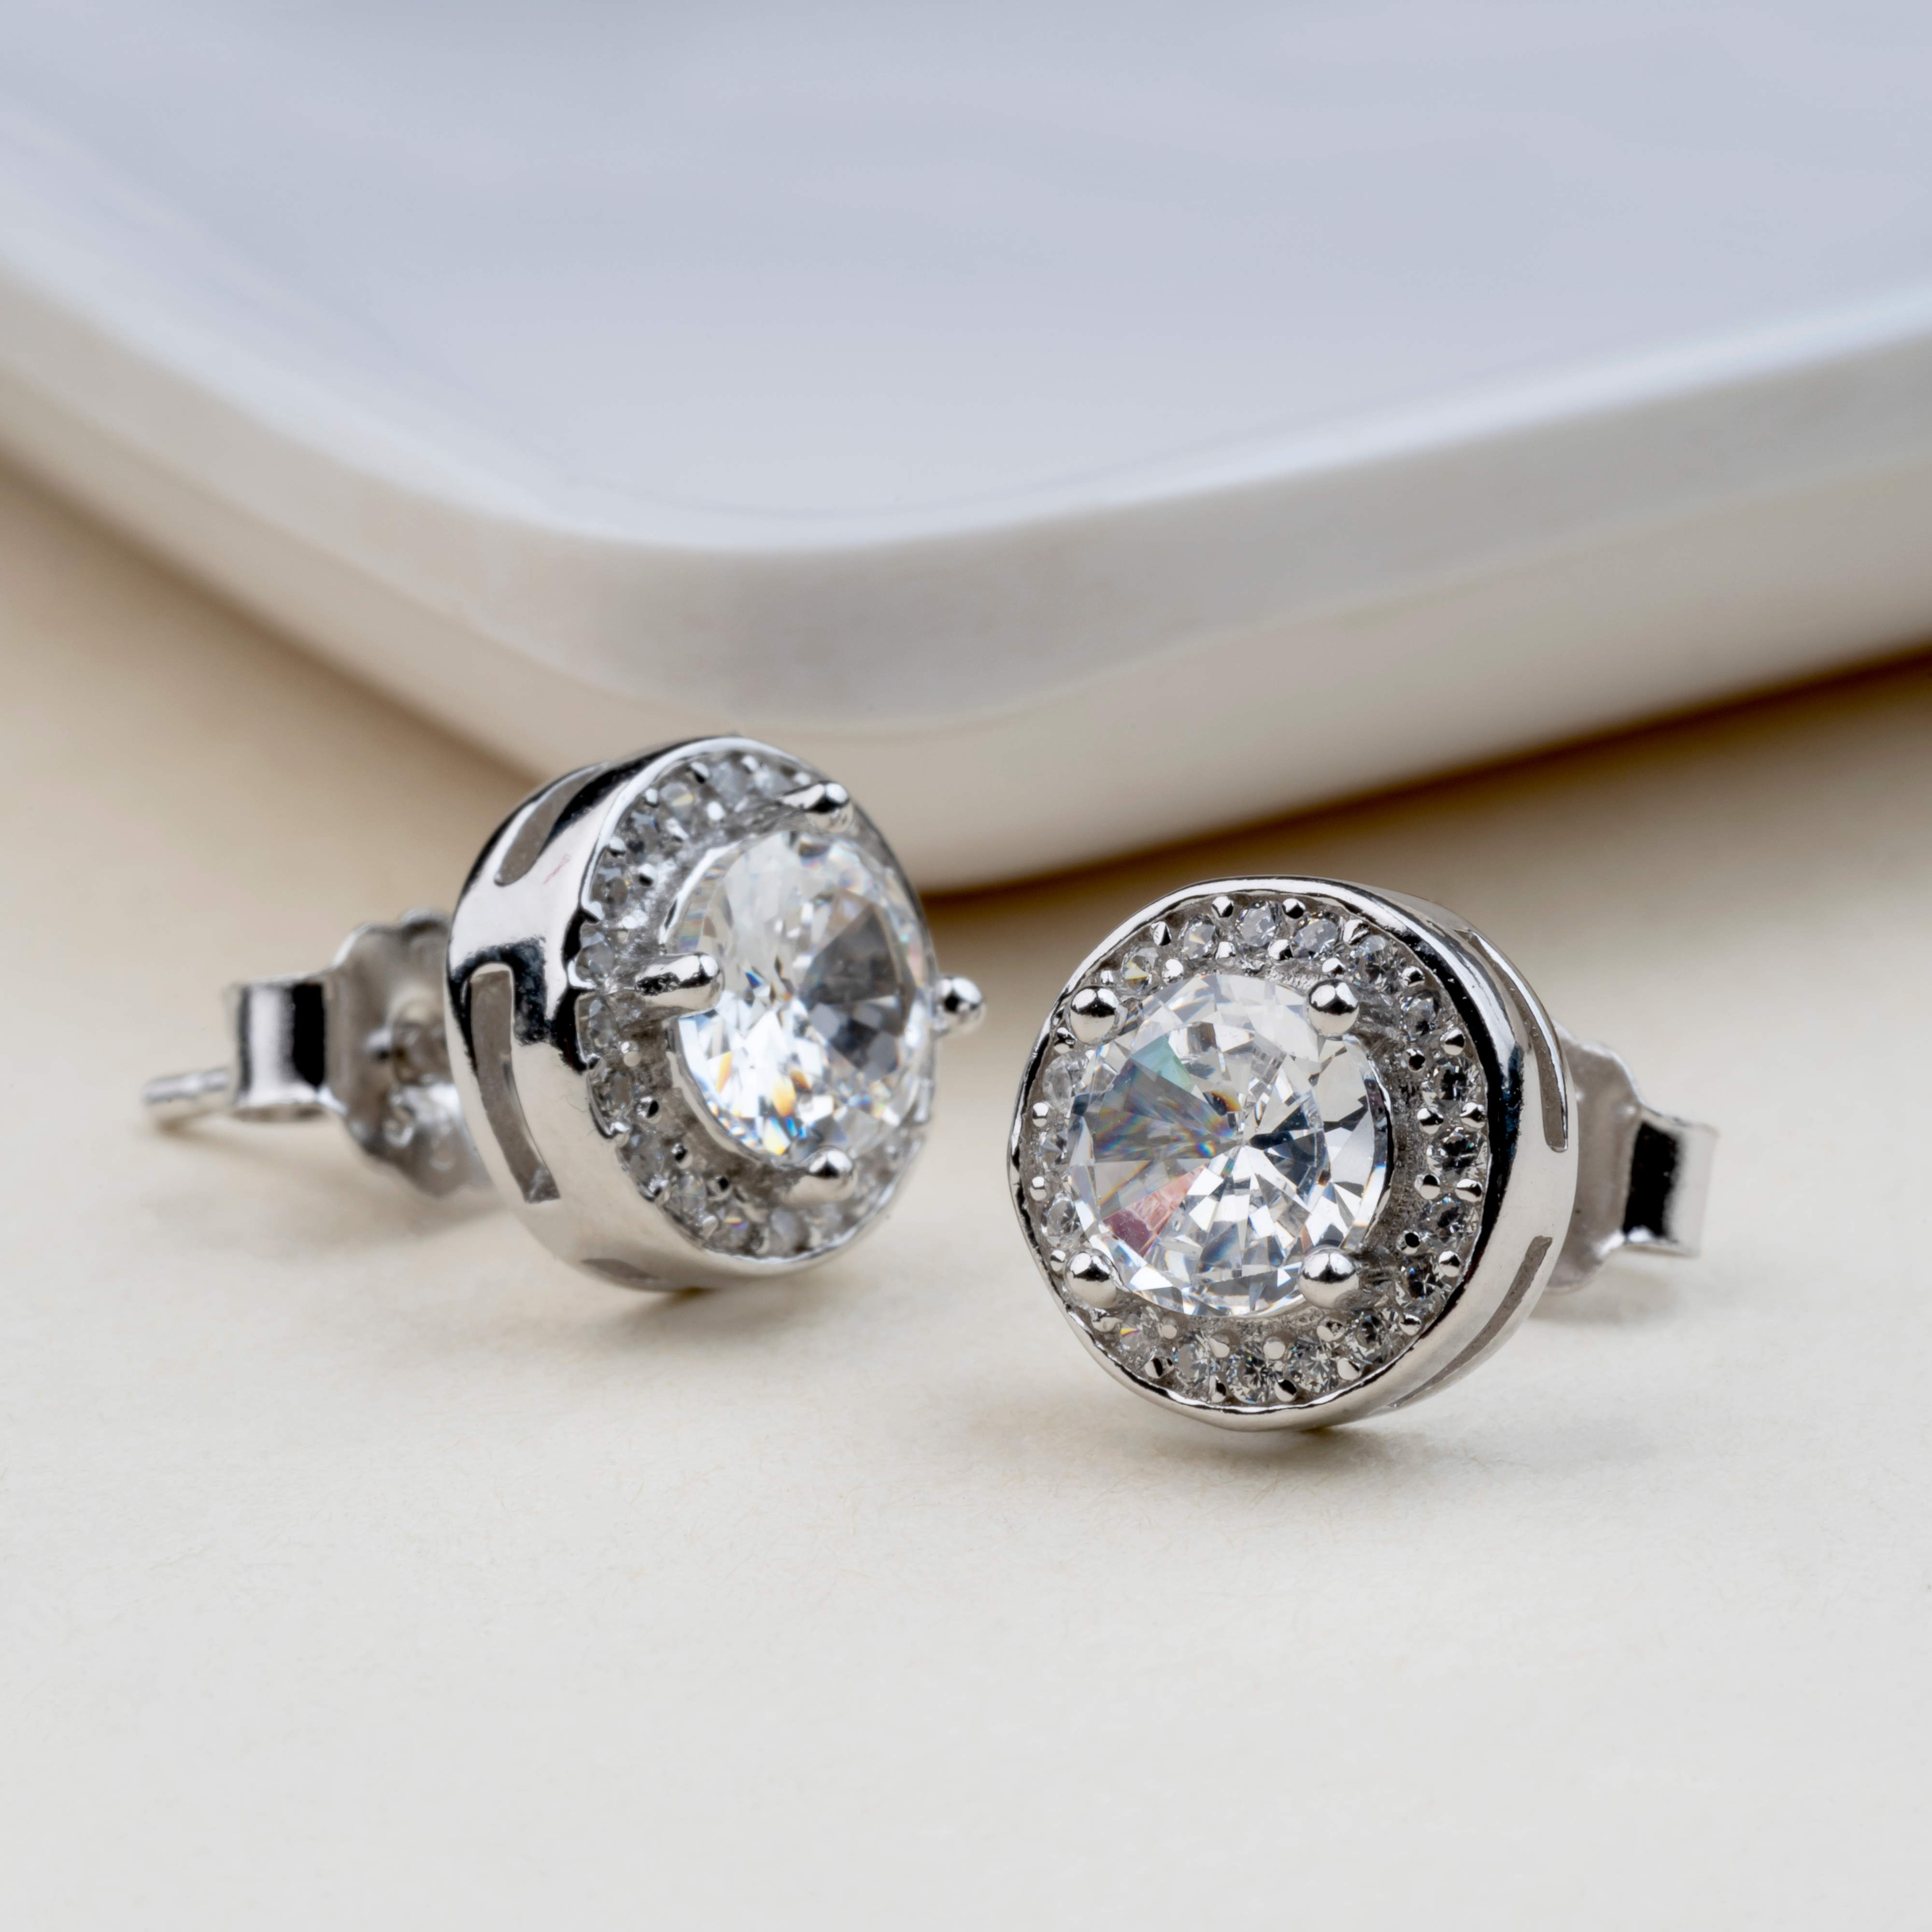 Silver Solitaire stud earrings